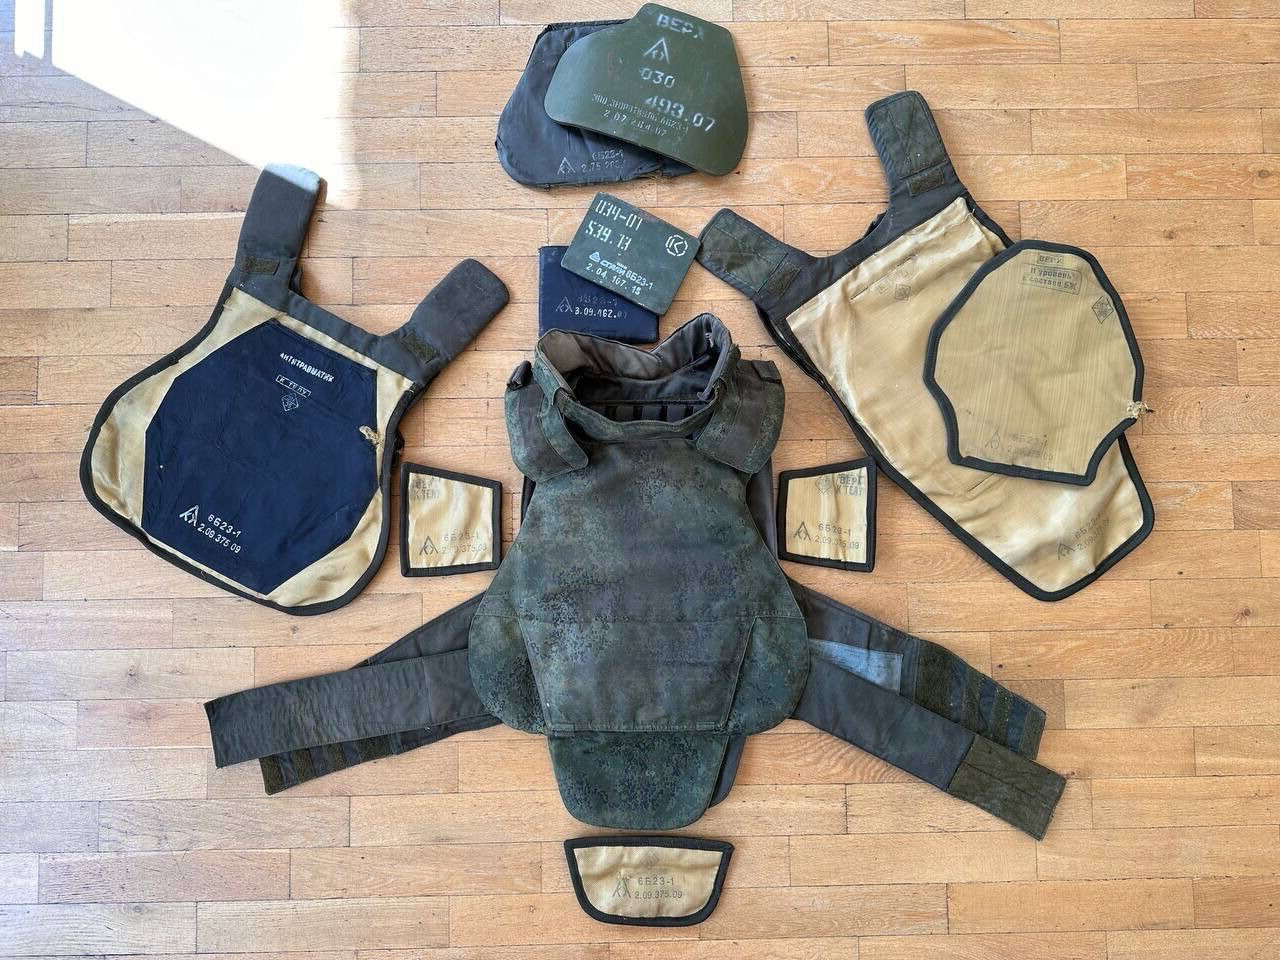 Original Used Military Russian Army w Plates - holder carrier vest 6B23-1 Ratnik